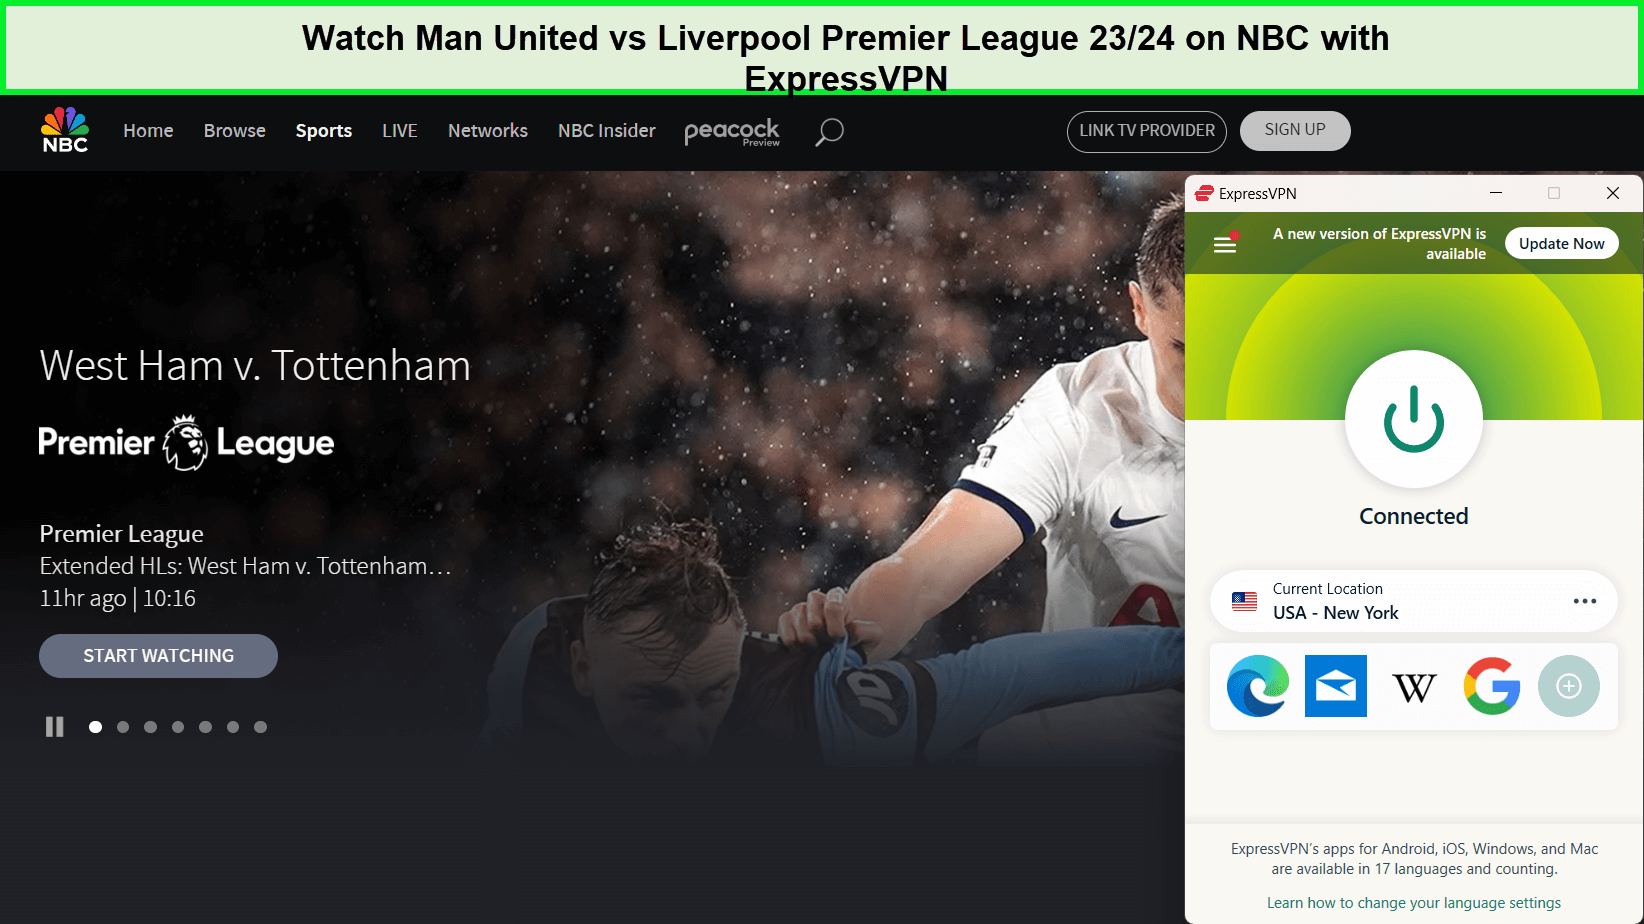 Watch-Man-United-vs-Liverpool-Premier-League-23-24-in-France-on-NBC